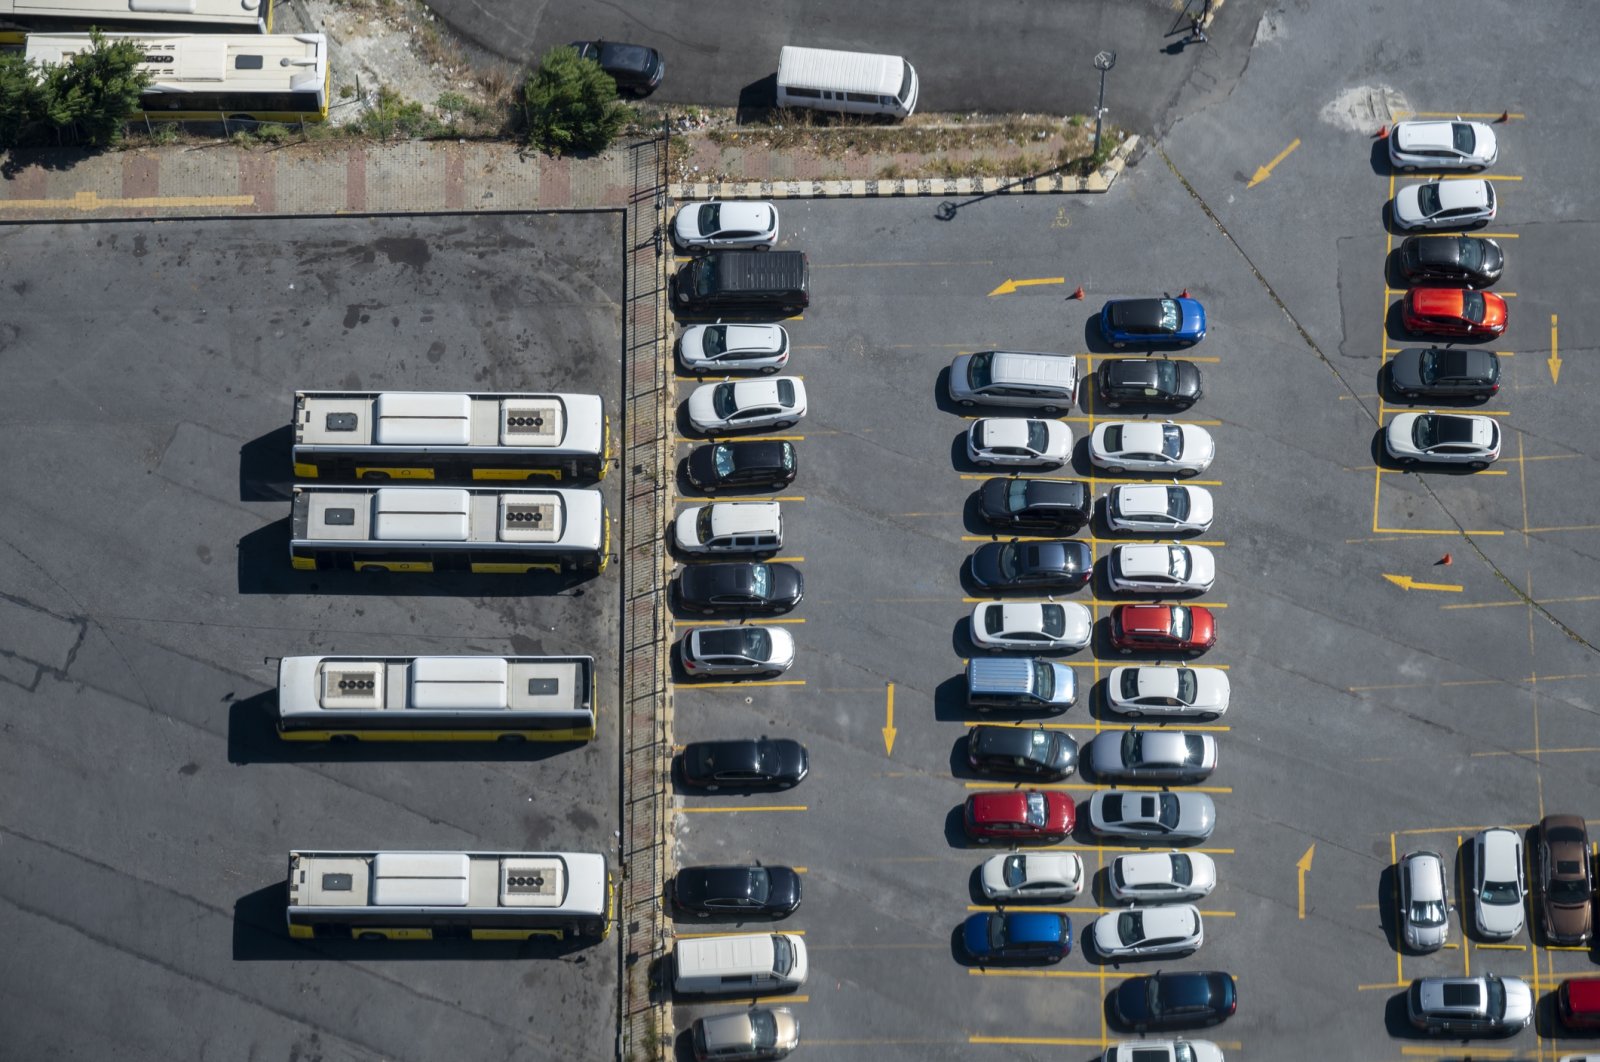 Parking shortage plagues daily lives of Istanbulites